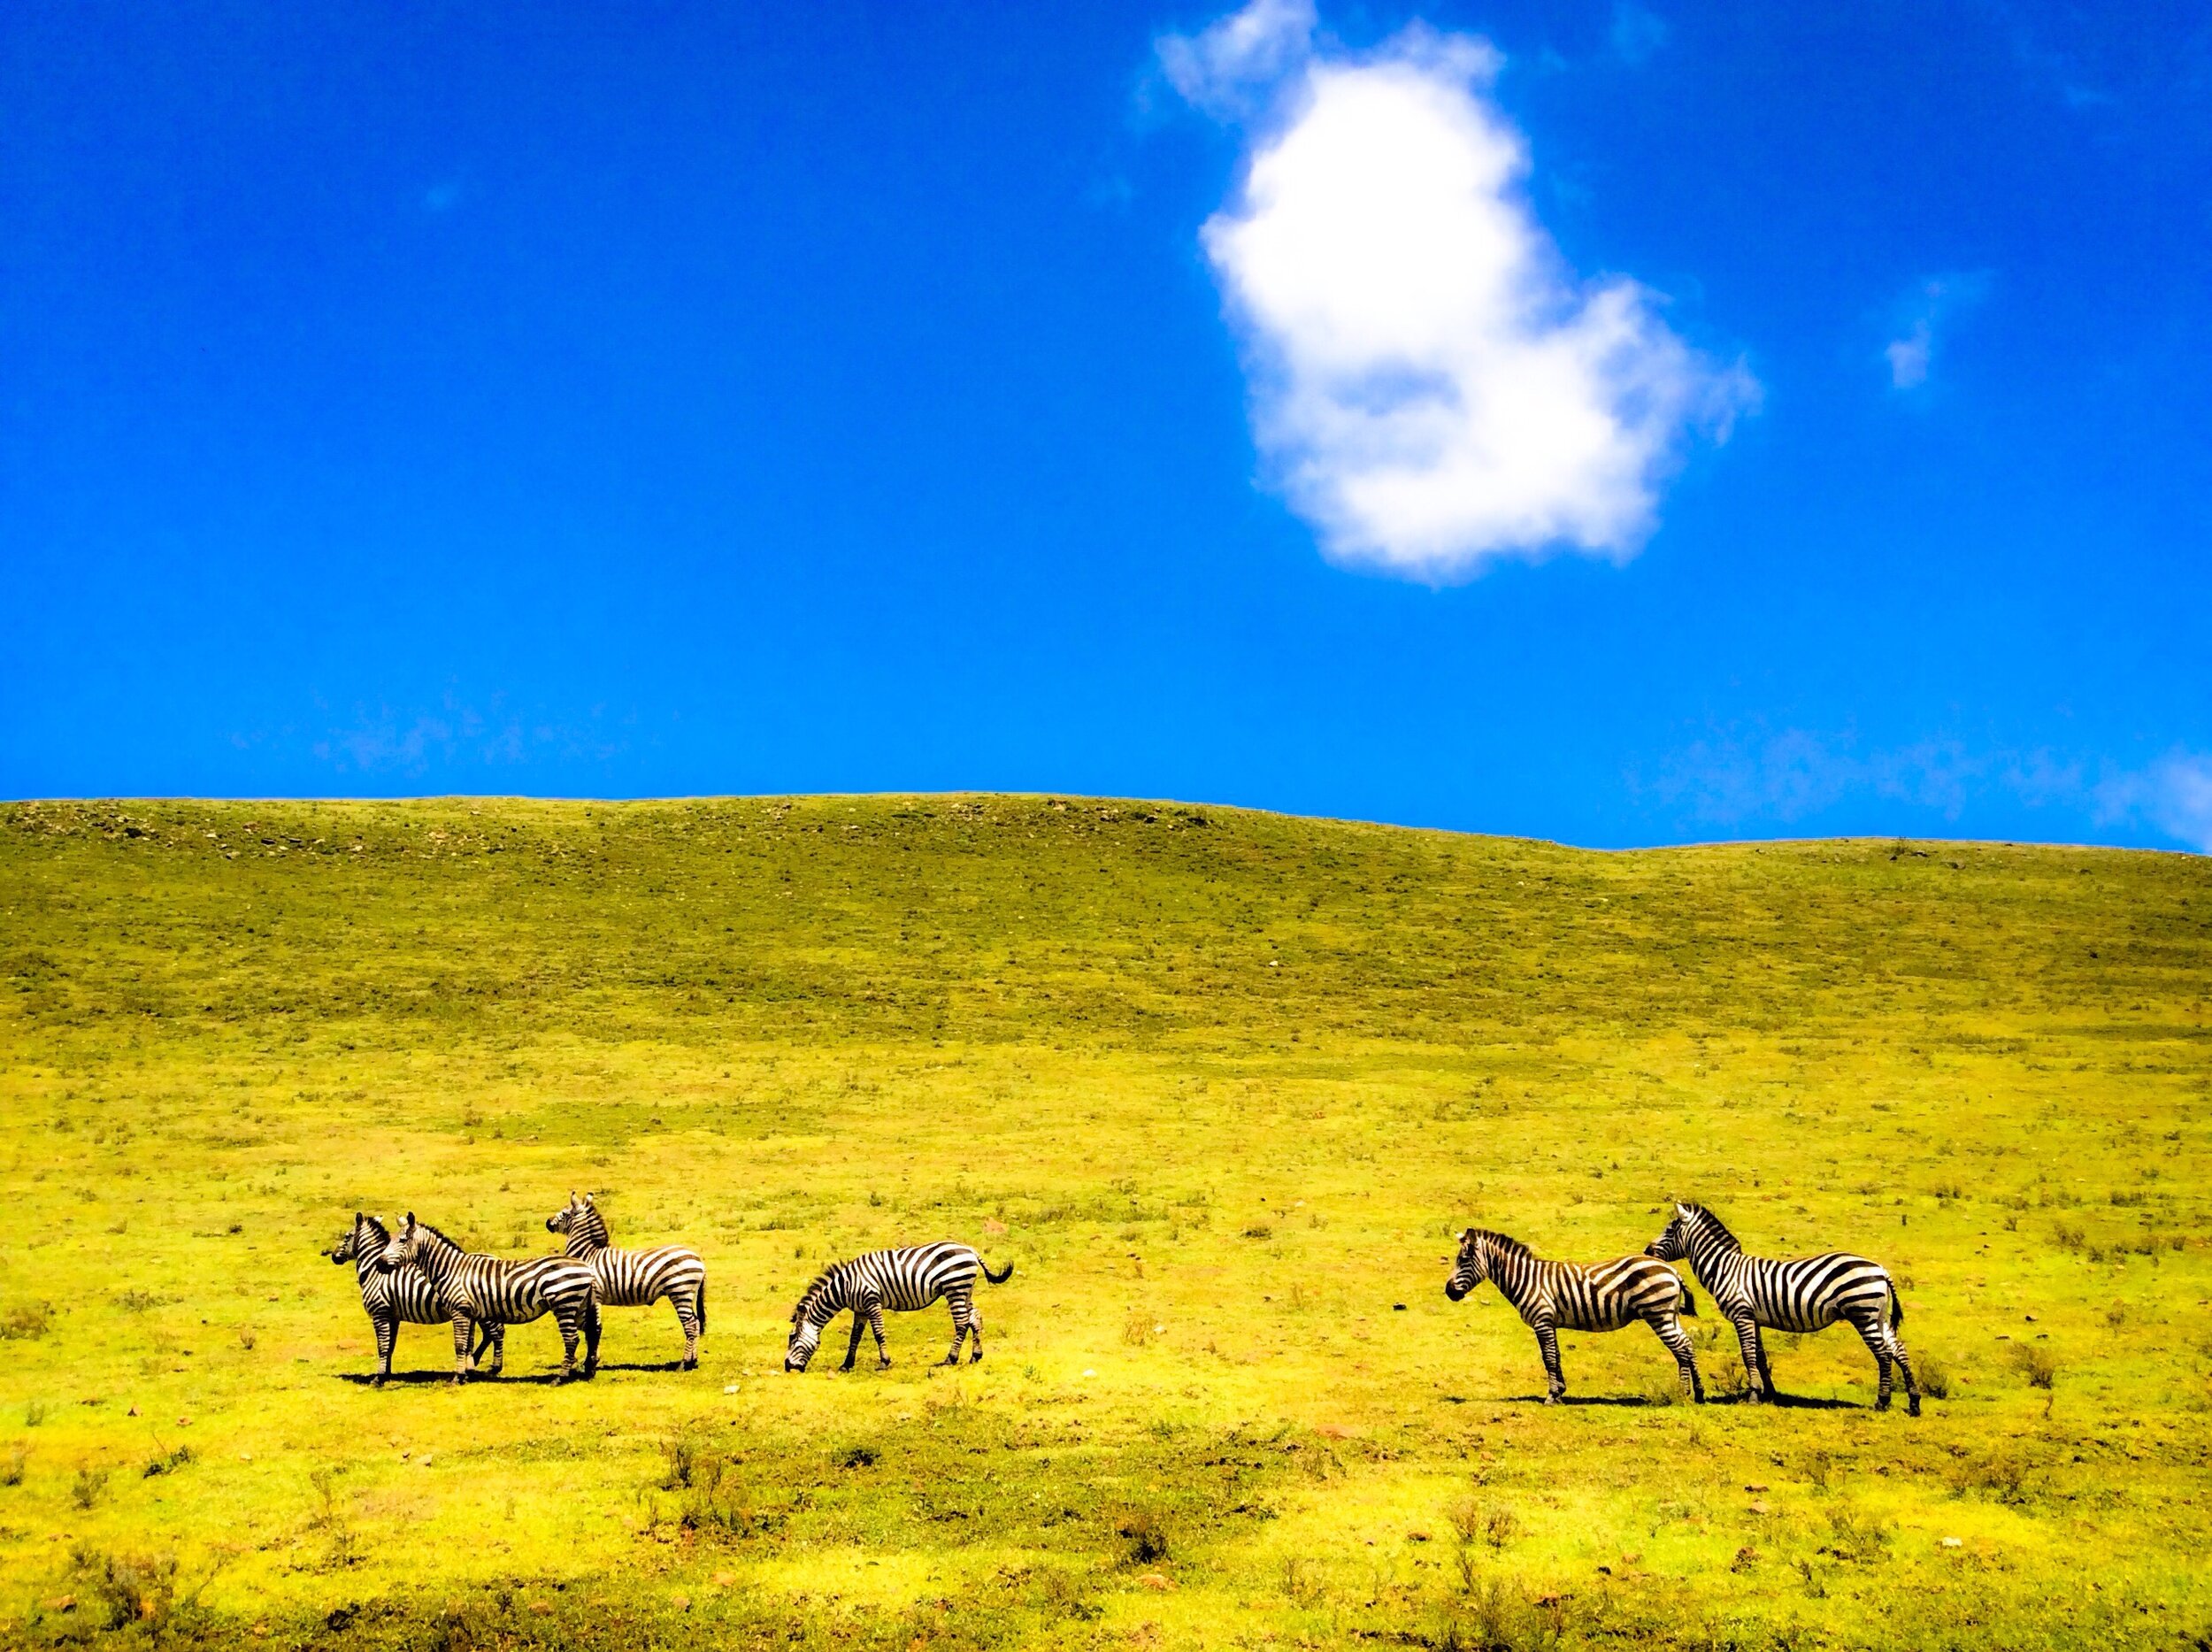 zebras-on-a-hillside-in-tanzania-africa-on-a-beautiful-blue-sky-day_t20_bky9VB.jpg